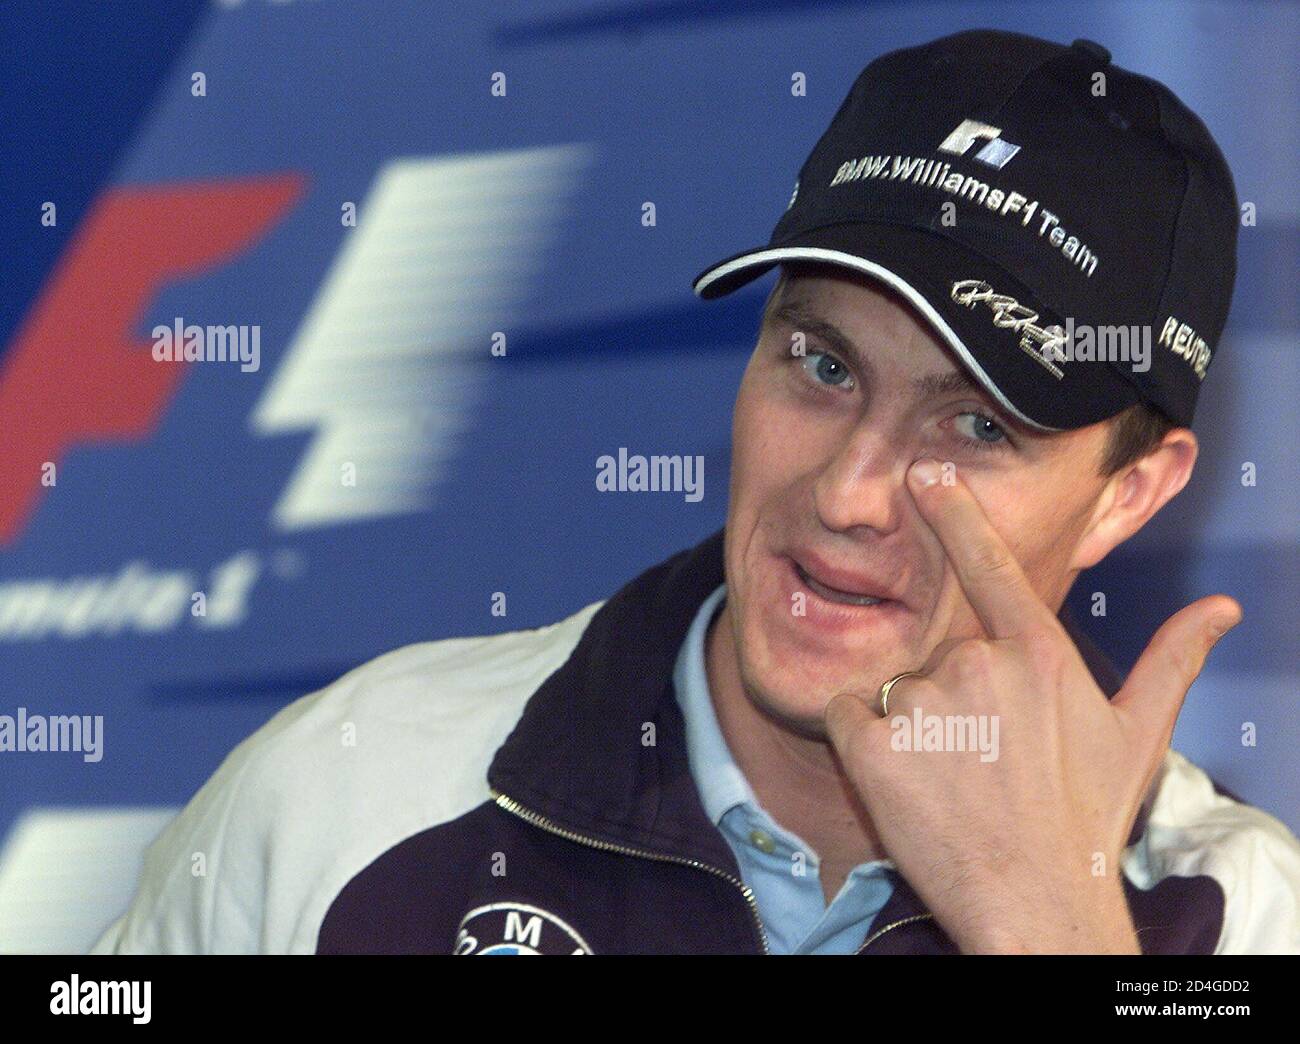 Germany's BMW Williams driver Ralf Schumacher wipes his eye at a news  conference ahead of the Belgian Formula One Grand Prix in Spa Francorchamps  August 30, 2001. [Ralf Schumacher, Scotland's McLaren Mercedes